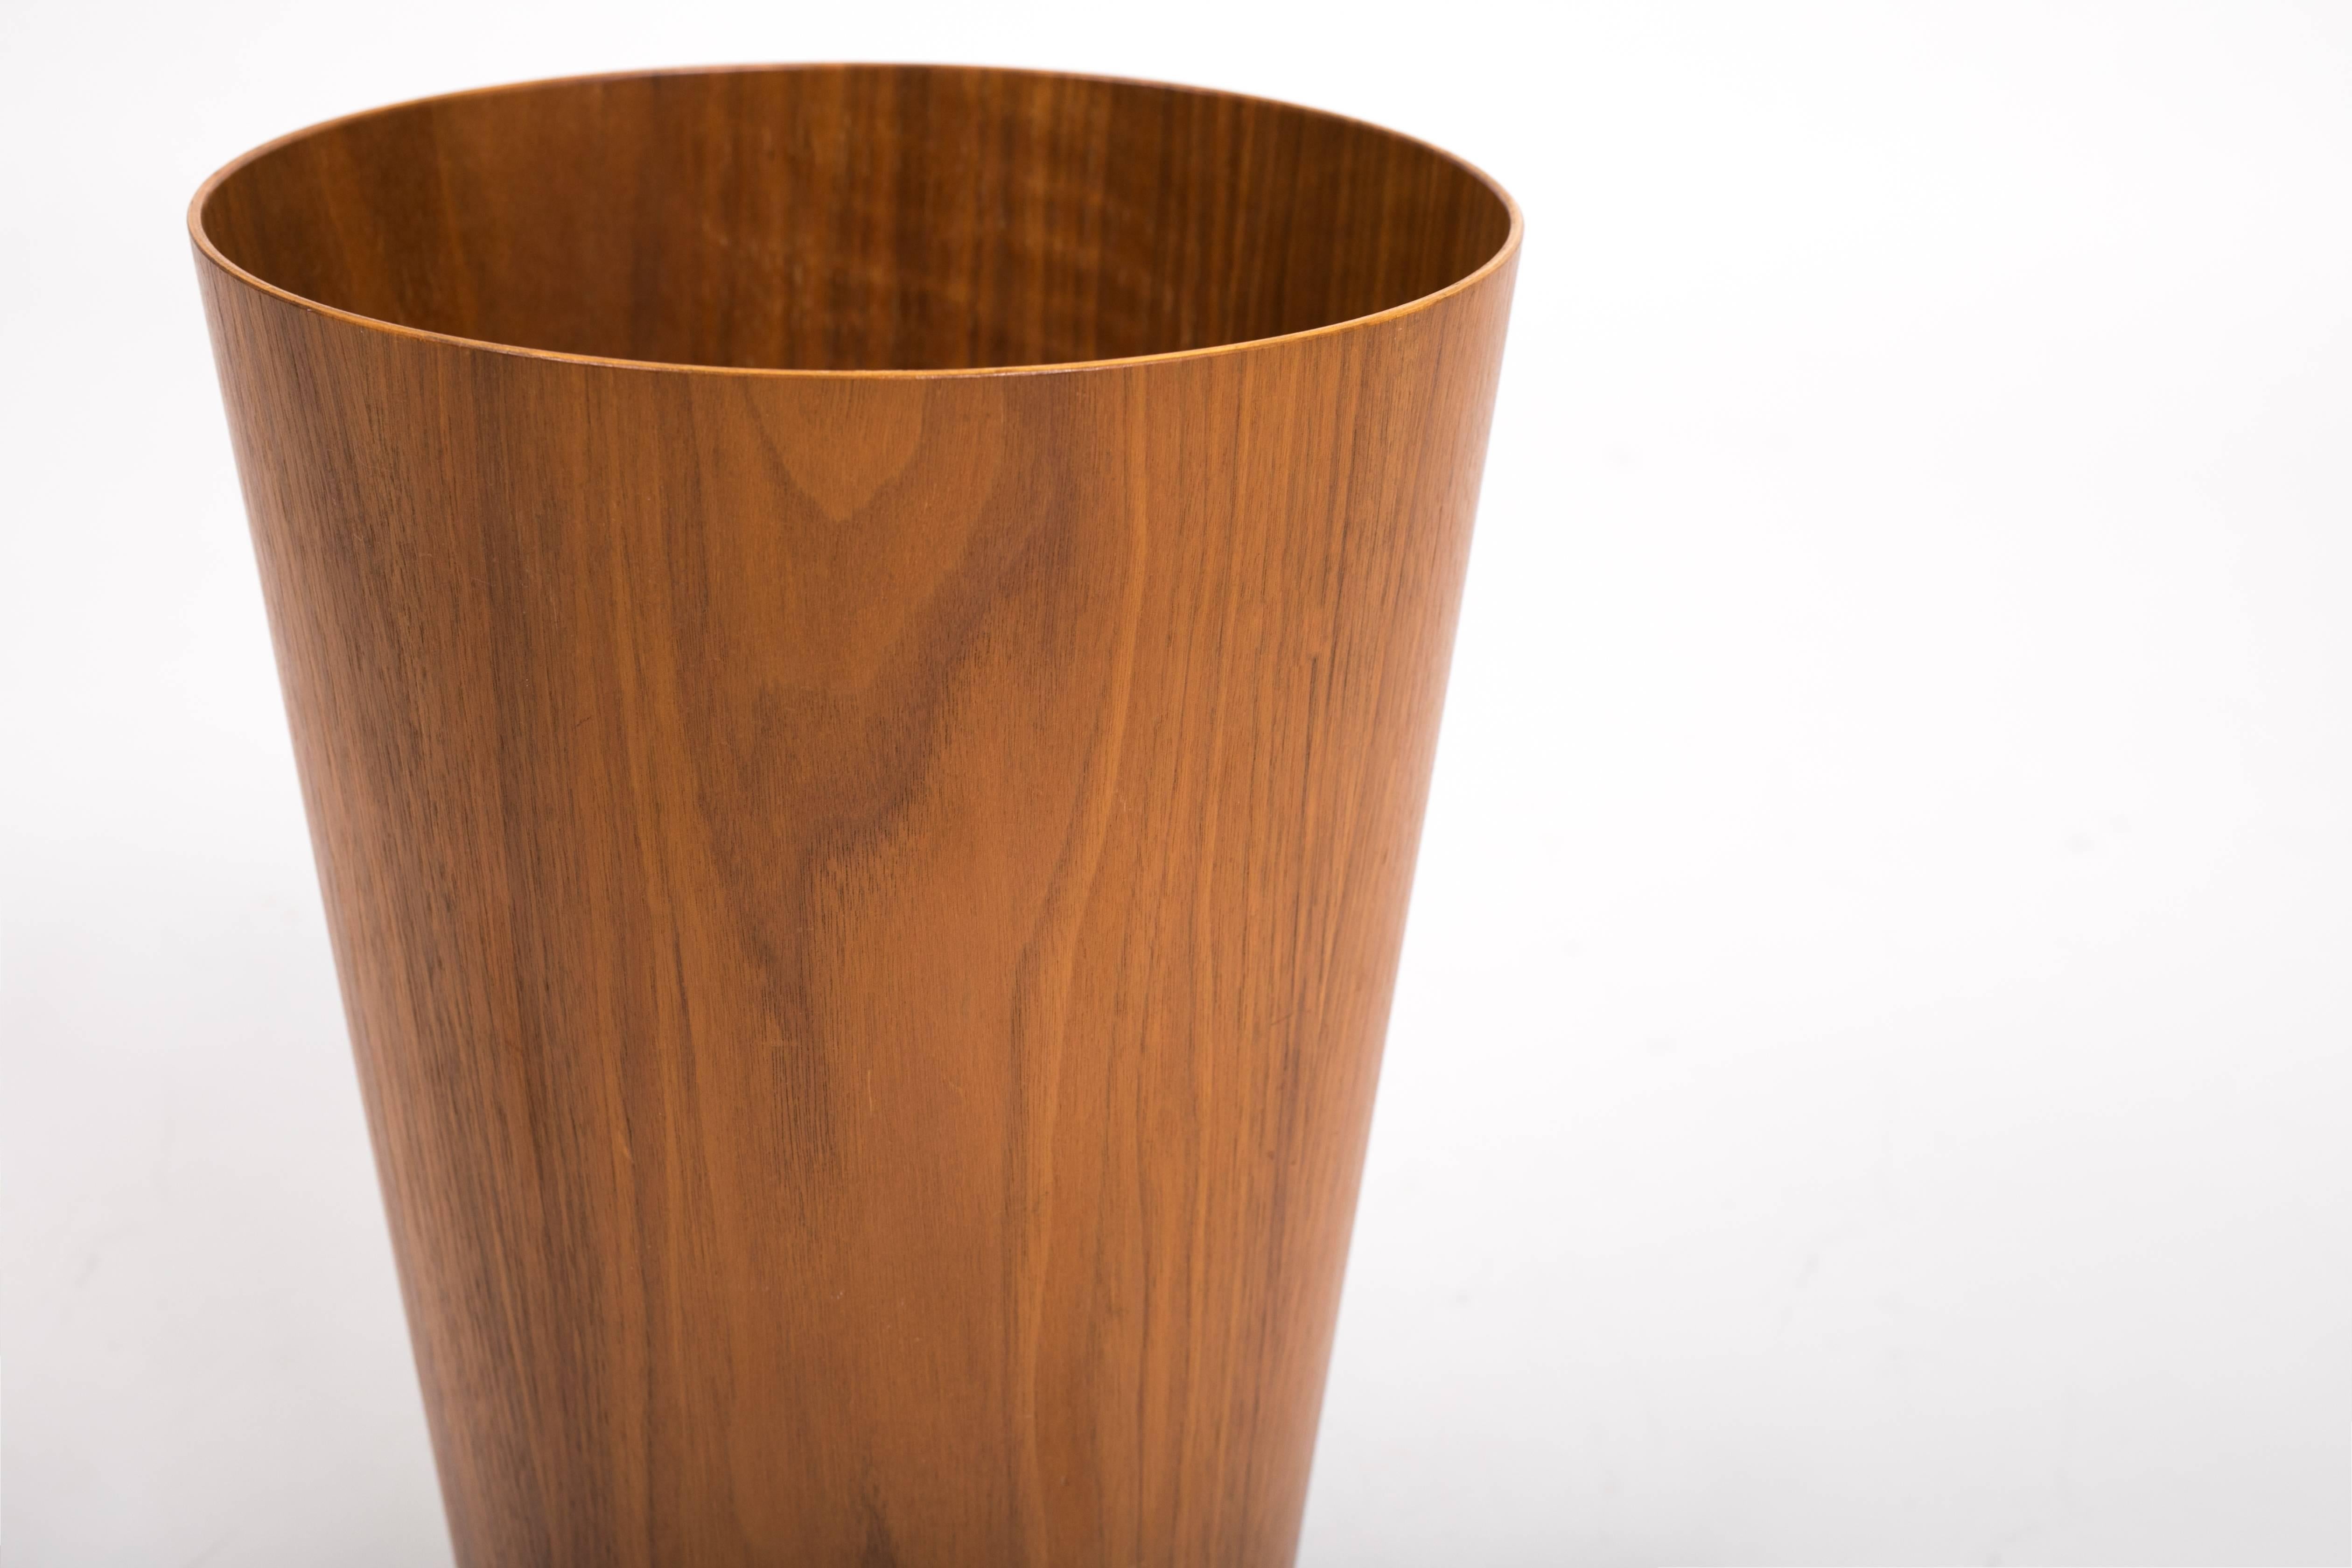 Swedish design house servex/rainbow wood products specialized in streamlined home and office accessories in teak veneer. Designed by Martin Åberg, this teak waste-paper basket has a delicately flared conical shape and interior in teak veneer. This